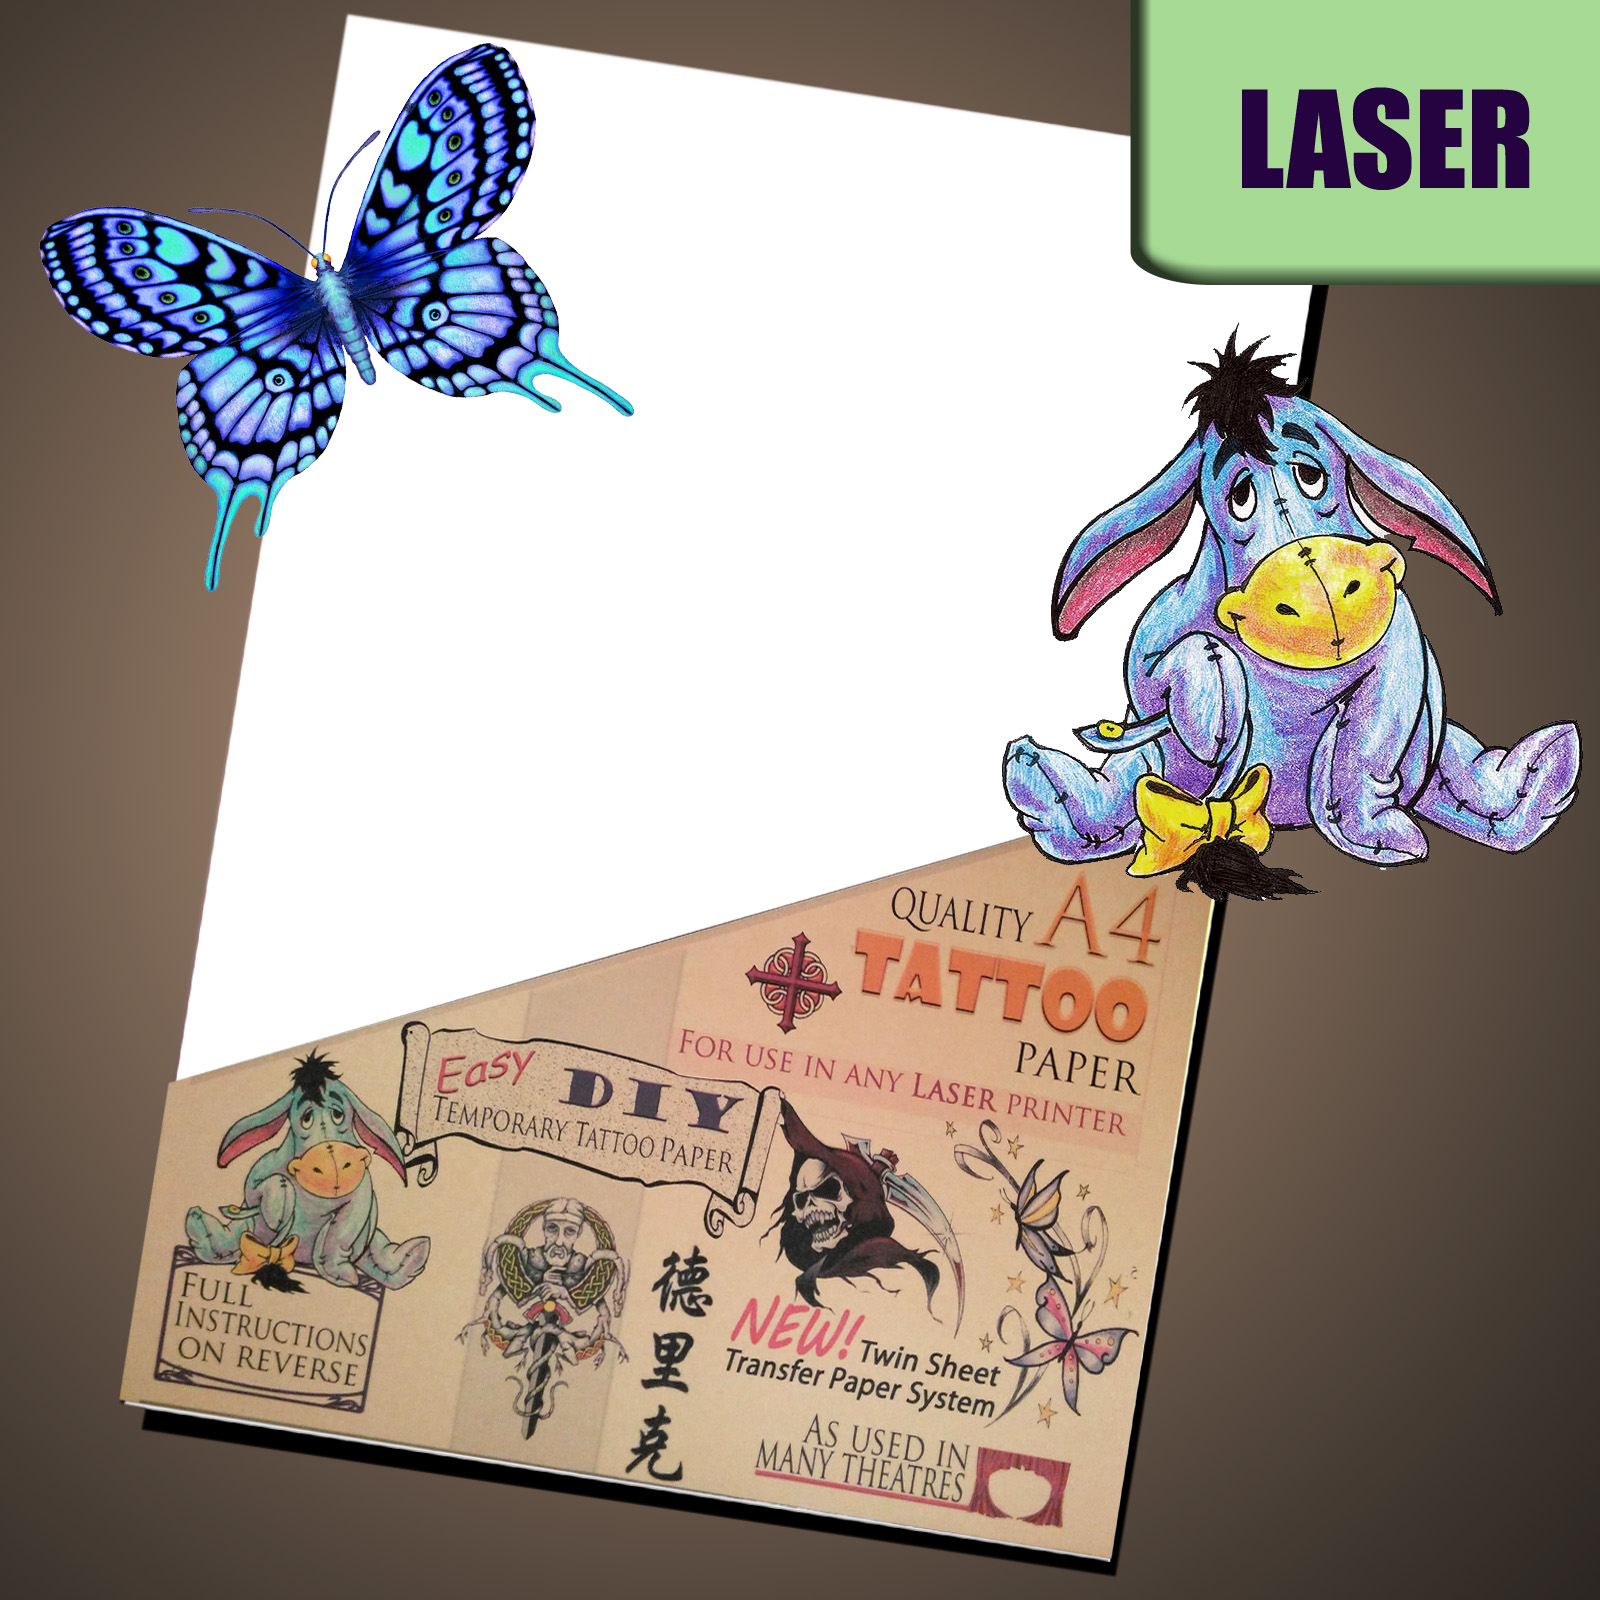 Temporary Tattoo Papers Laser Waterproof A4 